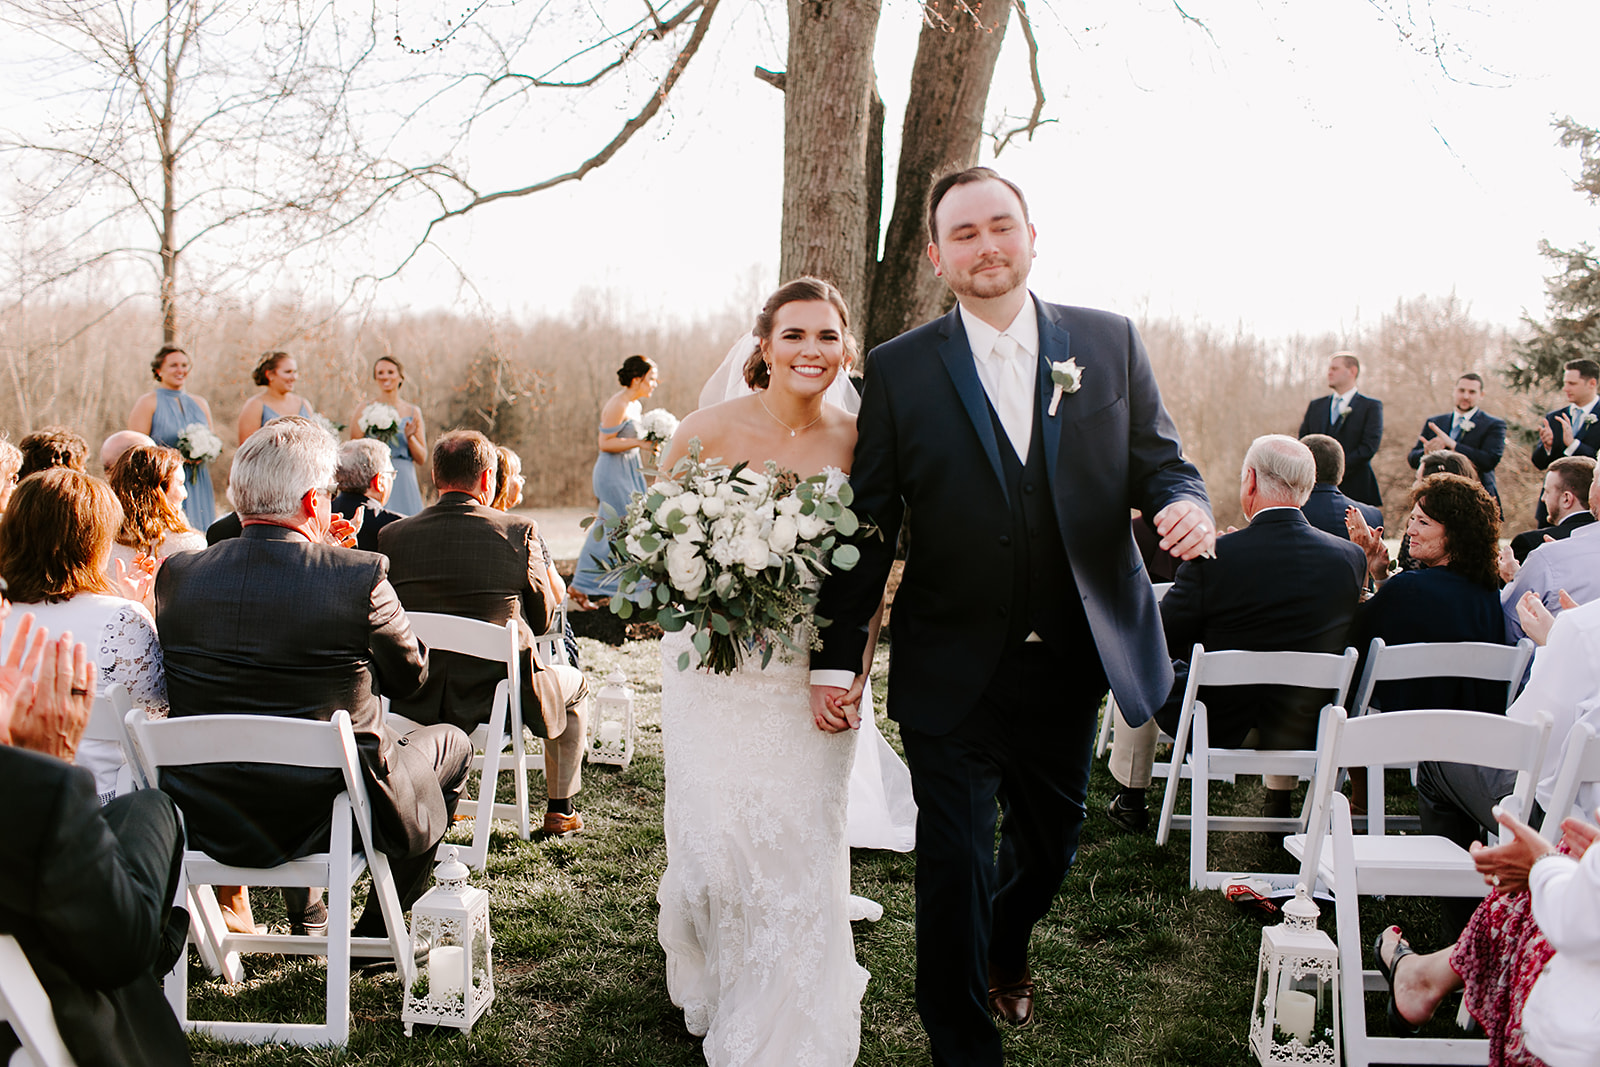 Lauren_and_Andrew_Mustard_Seed_Gardens_Noblesville_Indiana_by_Emily_Wehner_Photography-561.jpg